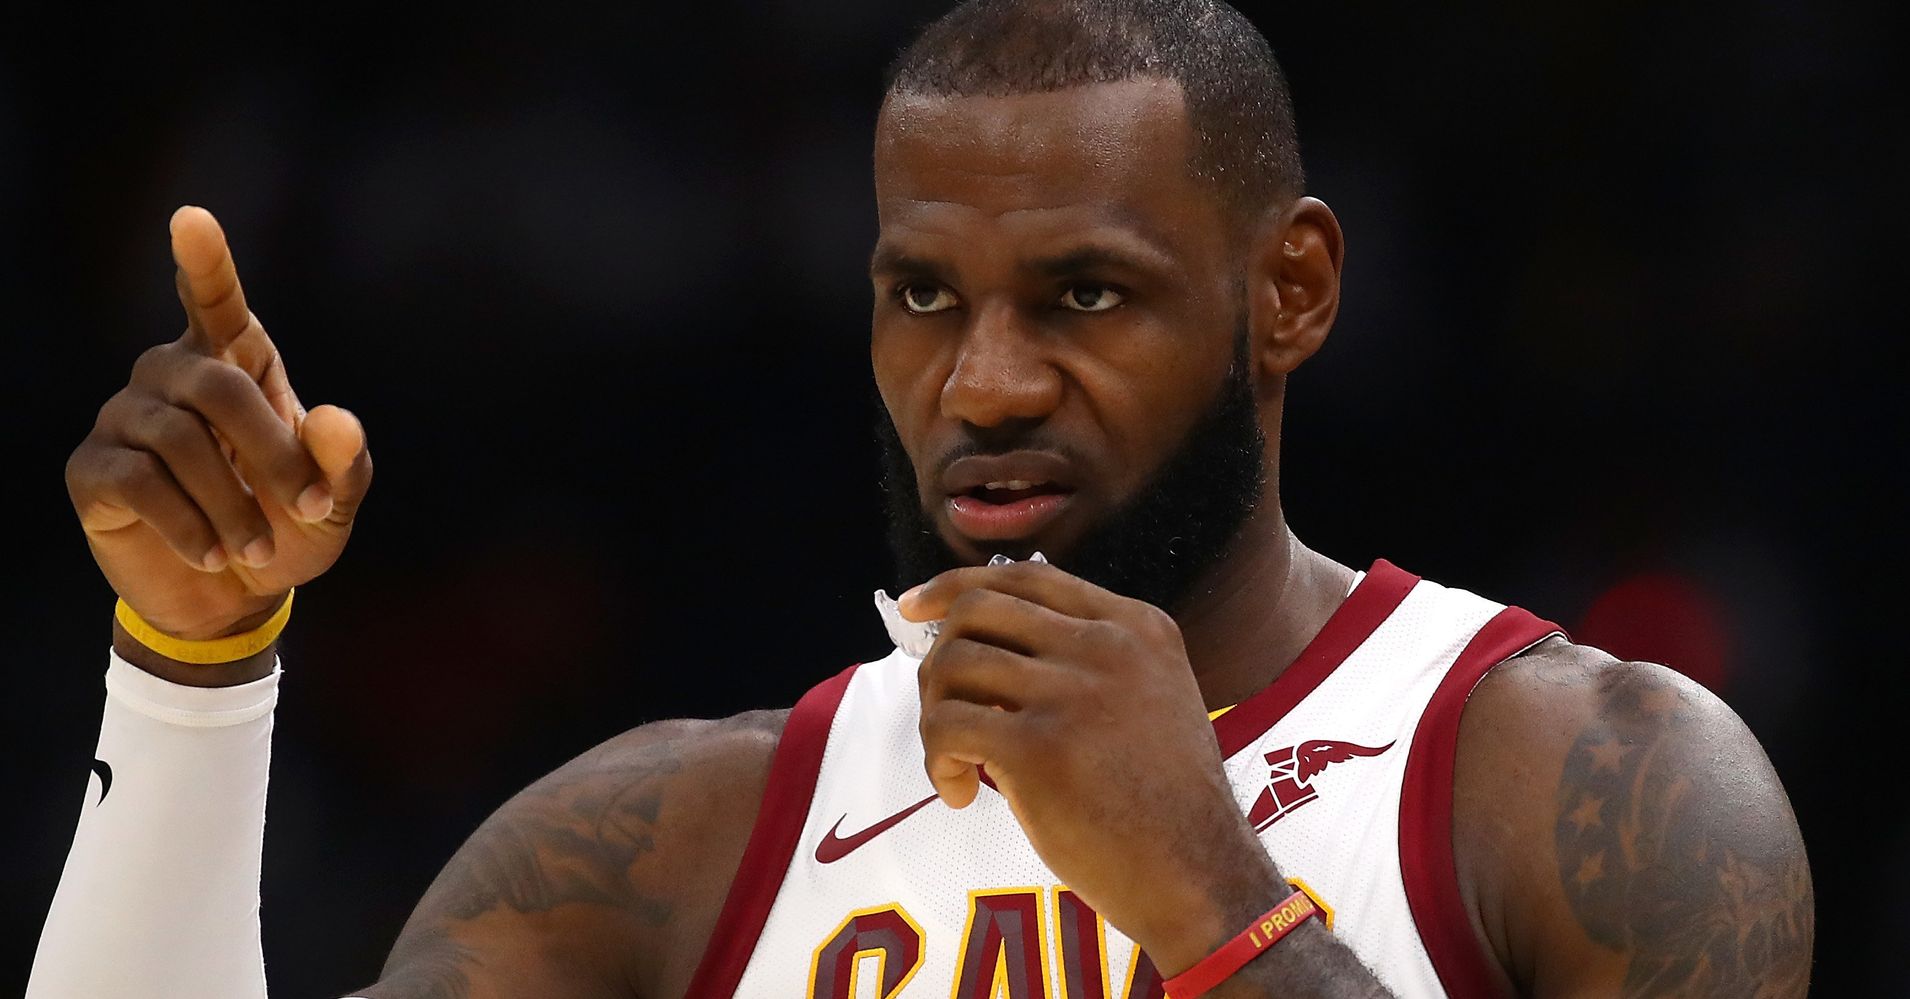 LeBron James Uses His Footwear To Make A Political Point | HuffPost